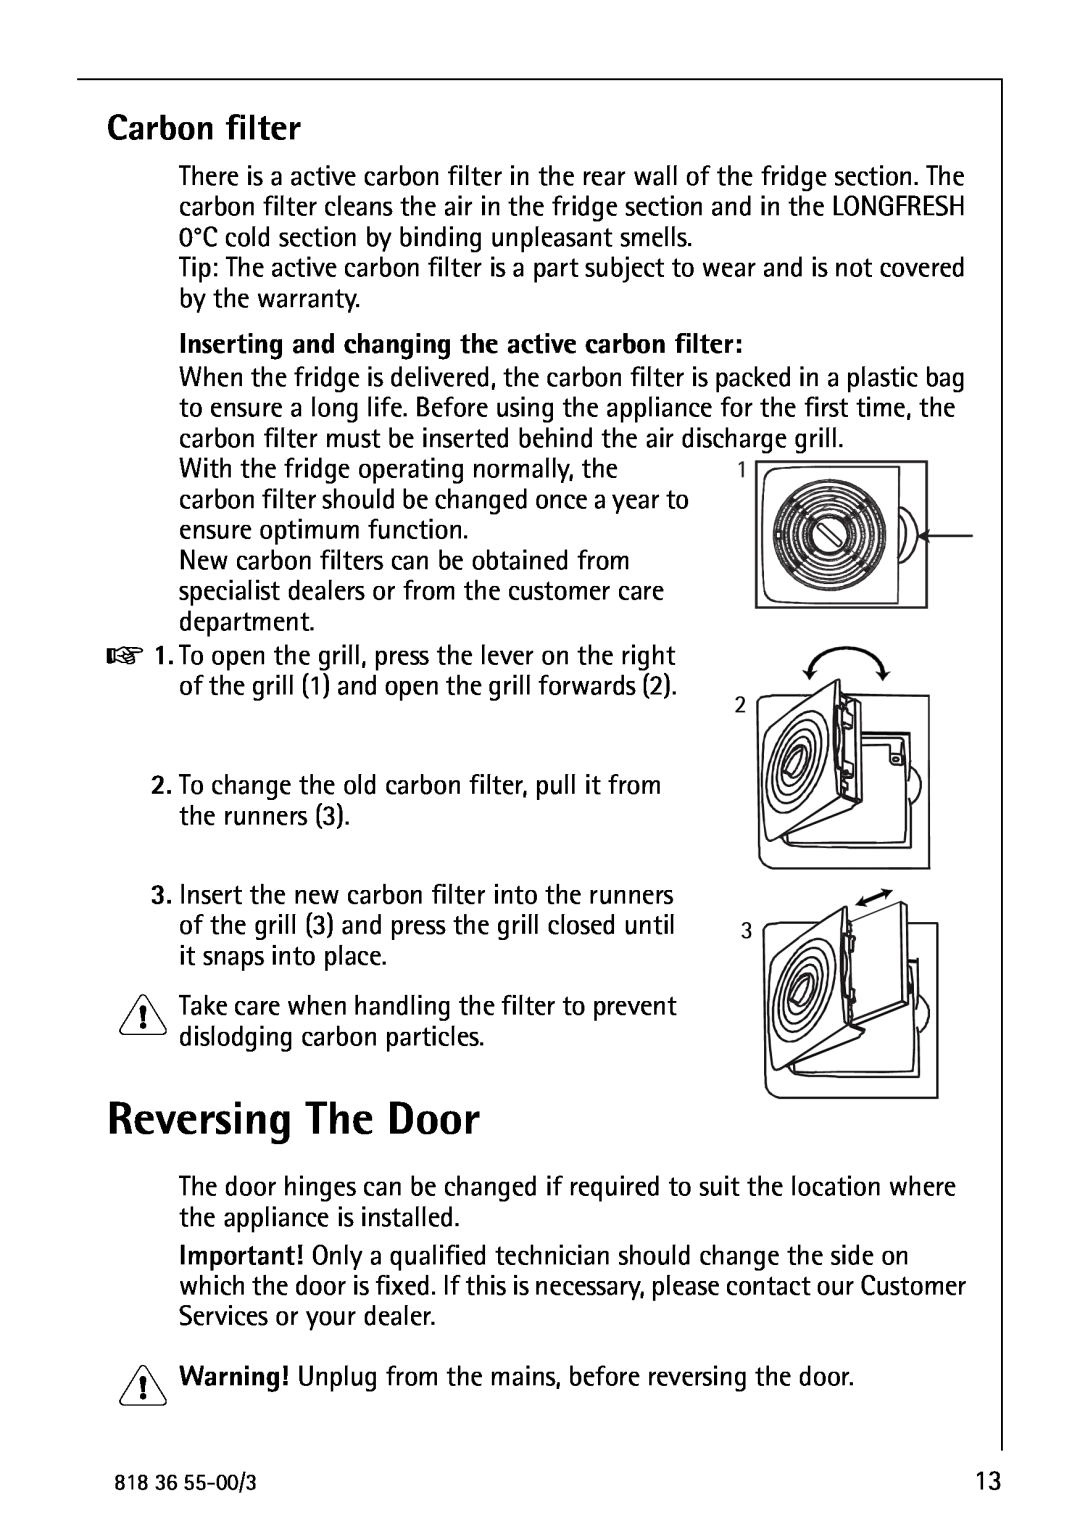 AEG 86378-KG operating instructions Reversing The Door, Carbon filter, Inserting and changing the active carbon filter 